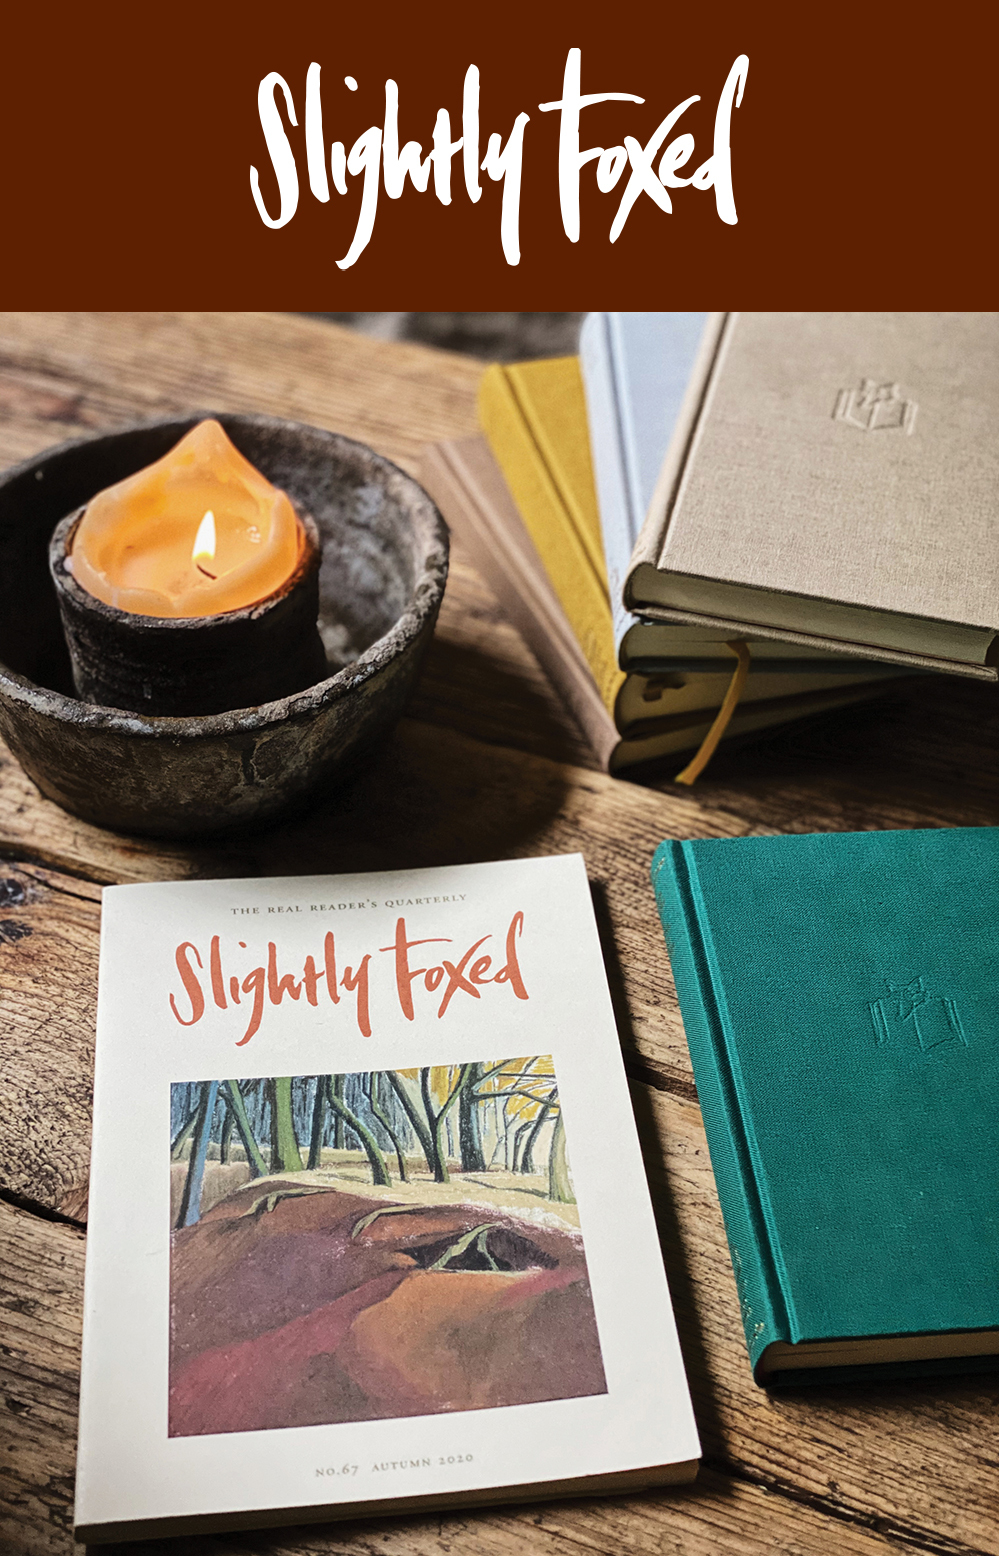 New this Autumn | Issue 67 of Slightly Foxed magazine